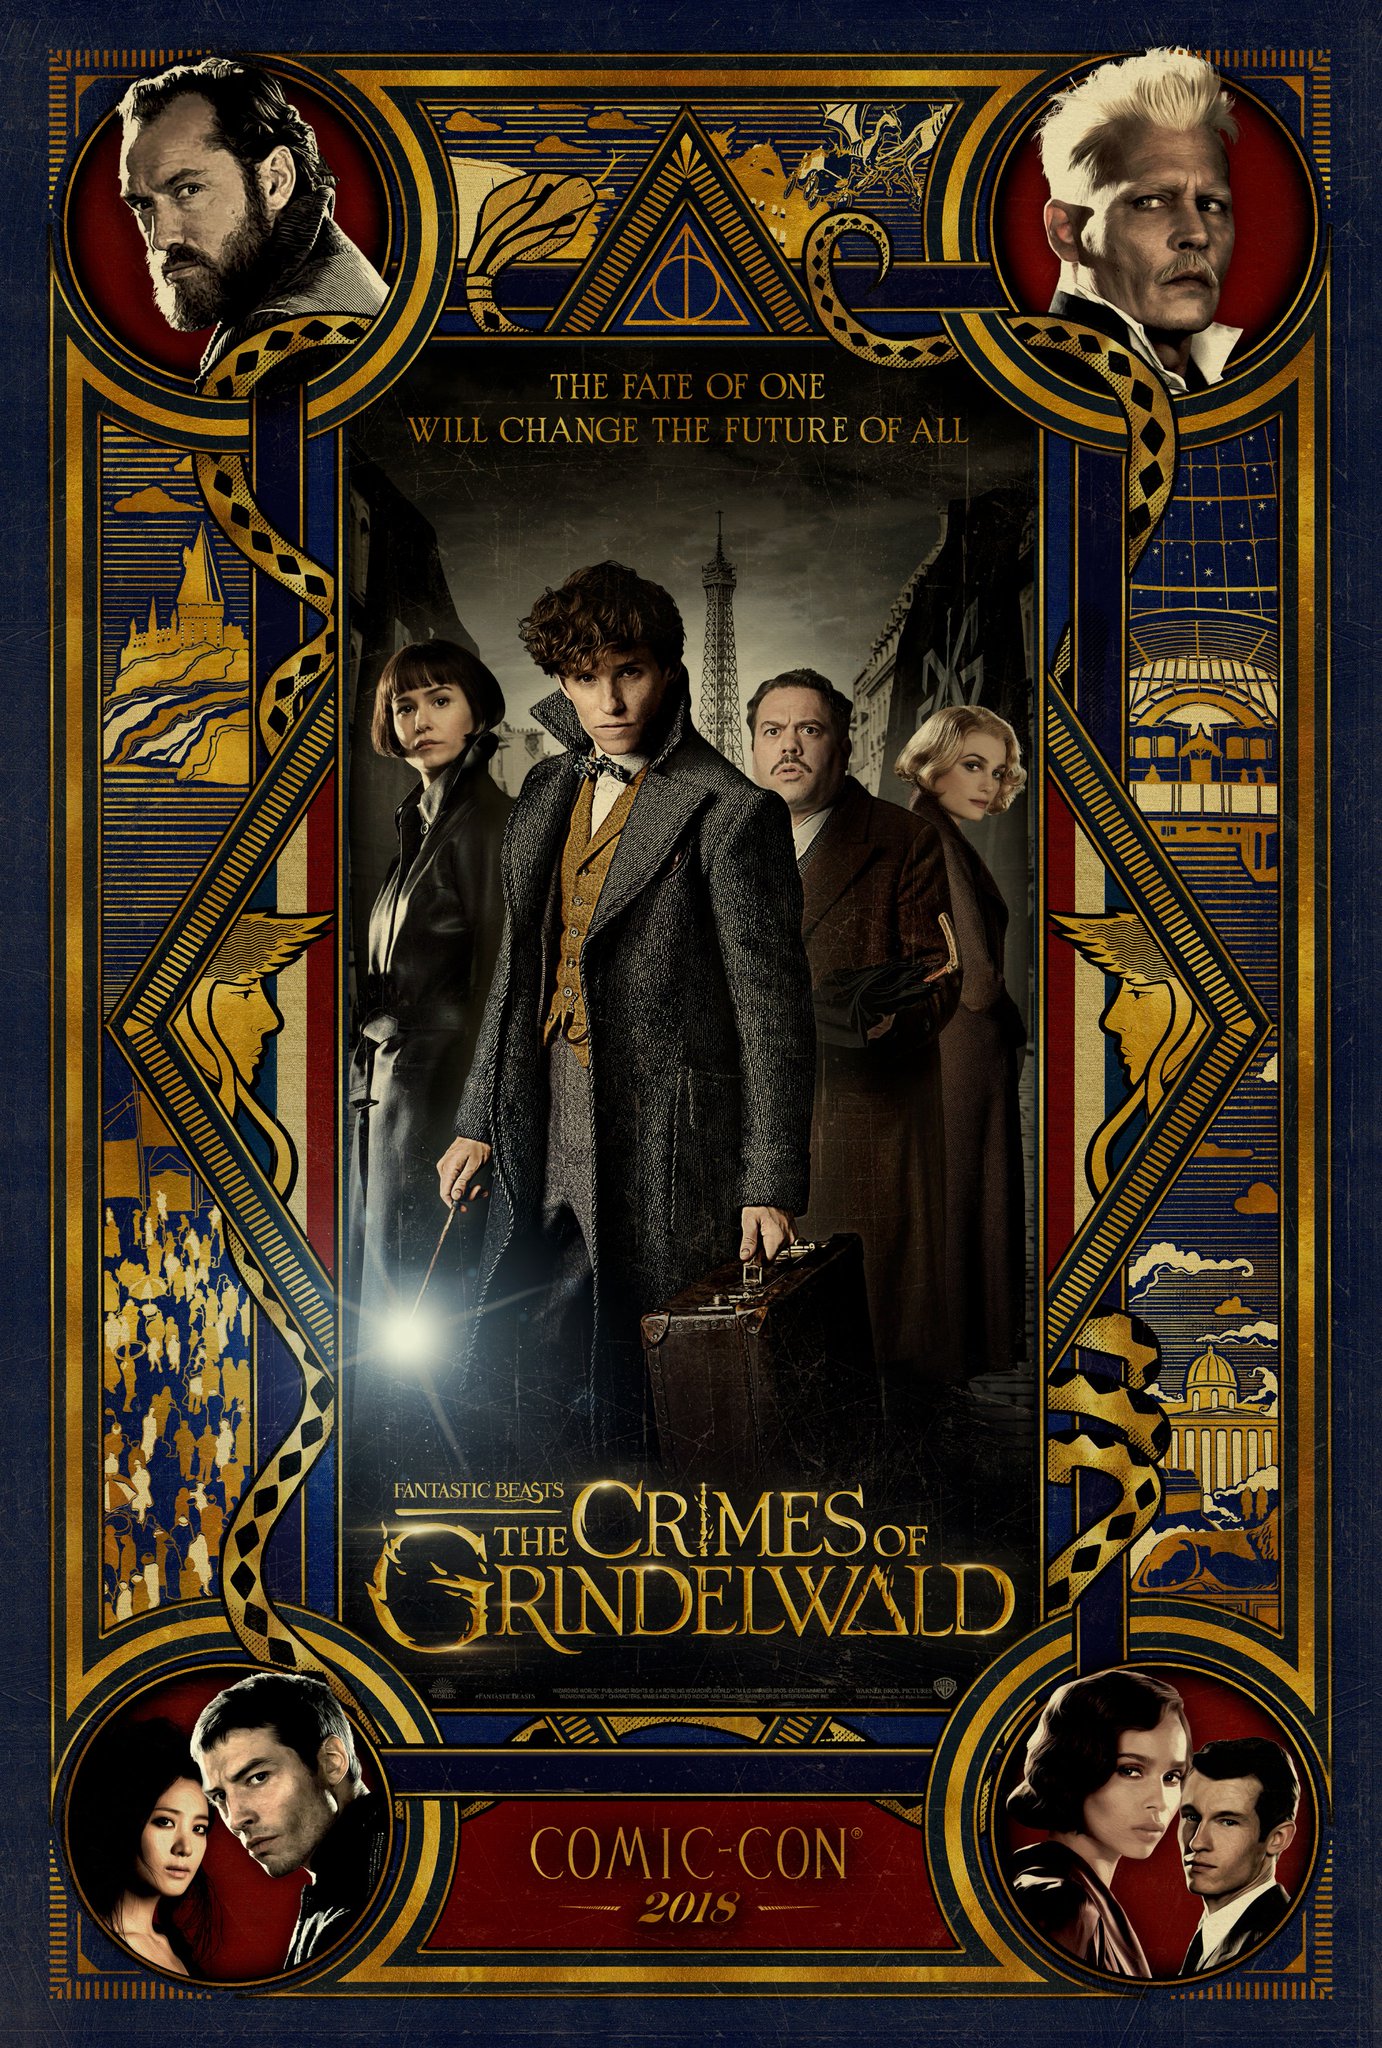 fantastic-beasts-the-crimes-of-grindelwald-comic-con-poster